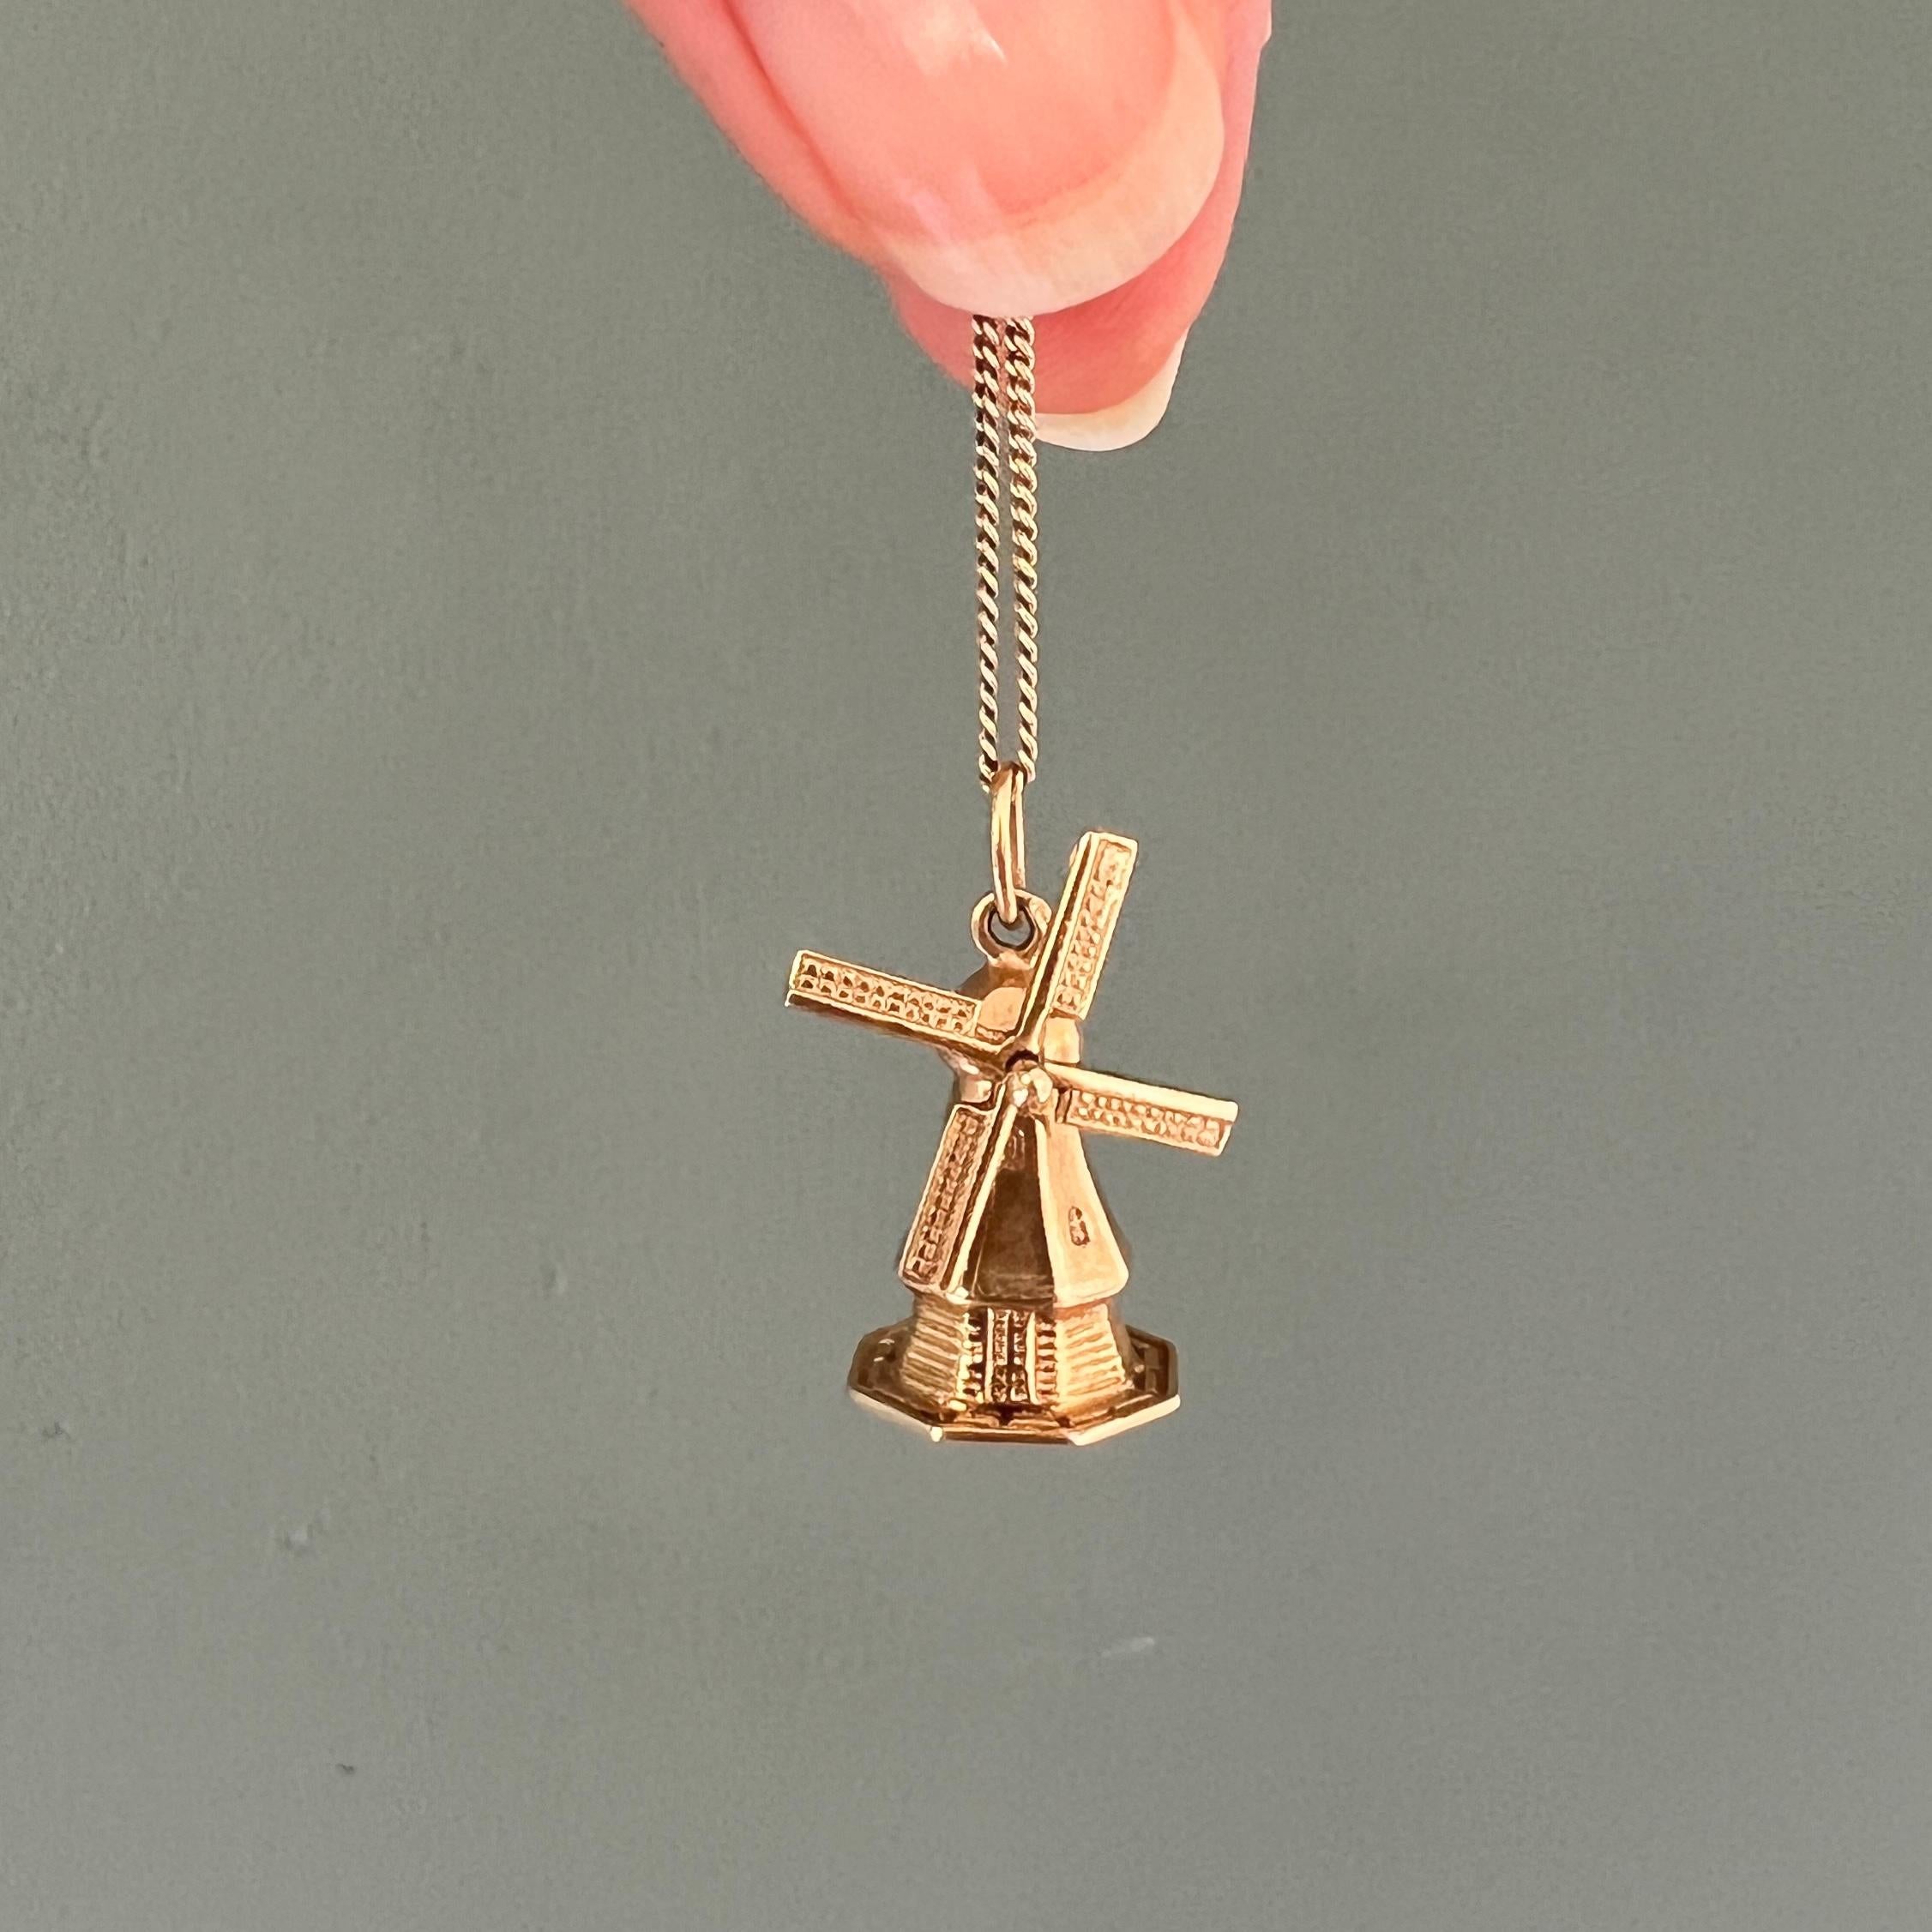 A large three-dimensional Holland windmill charm pendant. The octagon windmill is made in 14 karat gold and is nicely detailed with horizontal 'beams' on the hull and windows on the attic floors. The blades of the windmill are movable and can spin